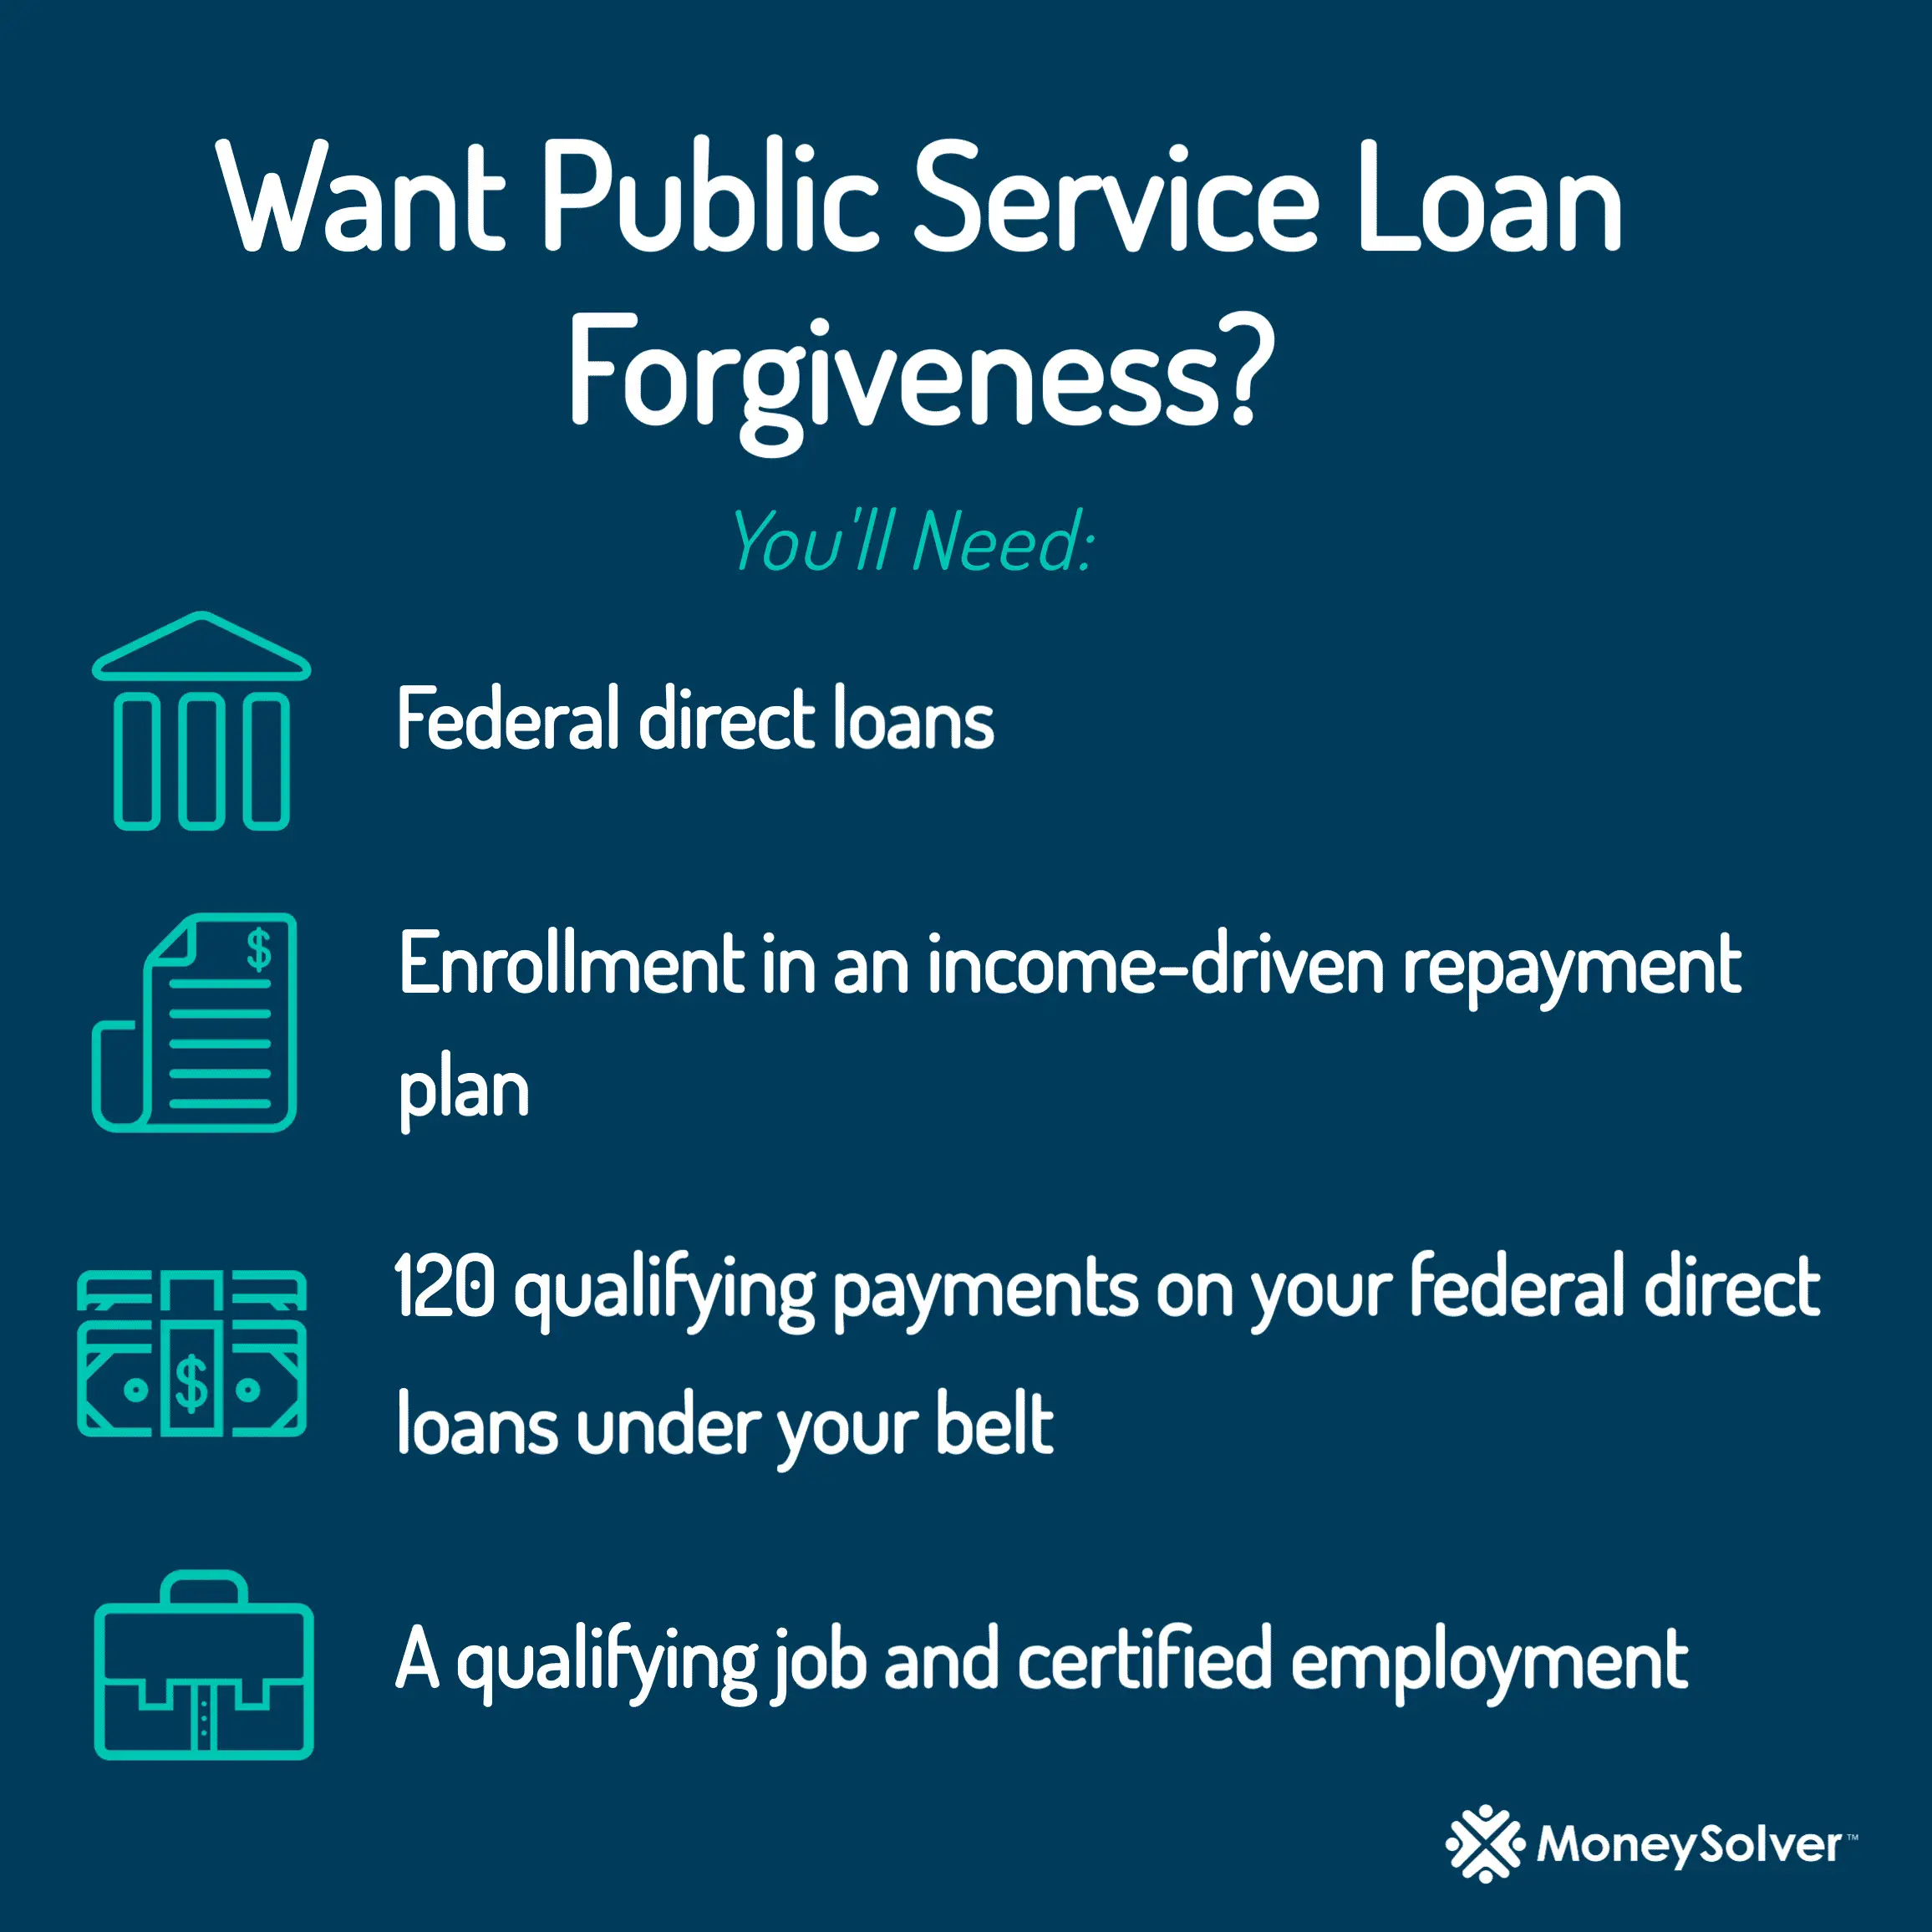 Guide on how to qualify for Public Service Loan Forgiveness